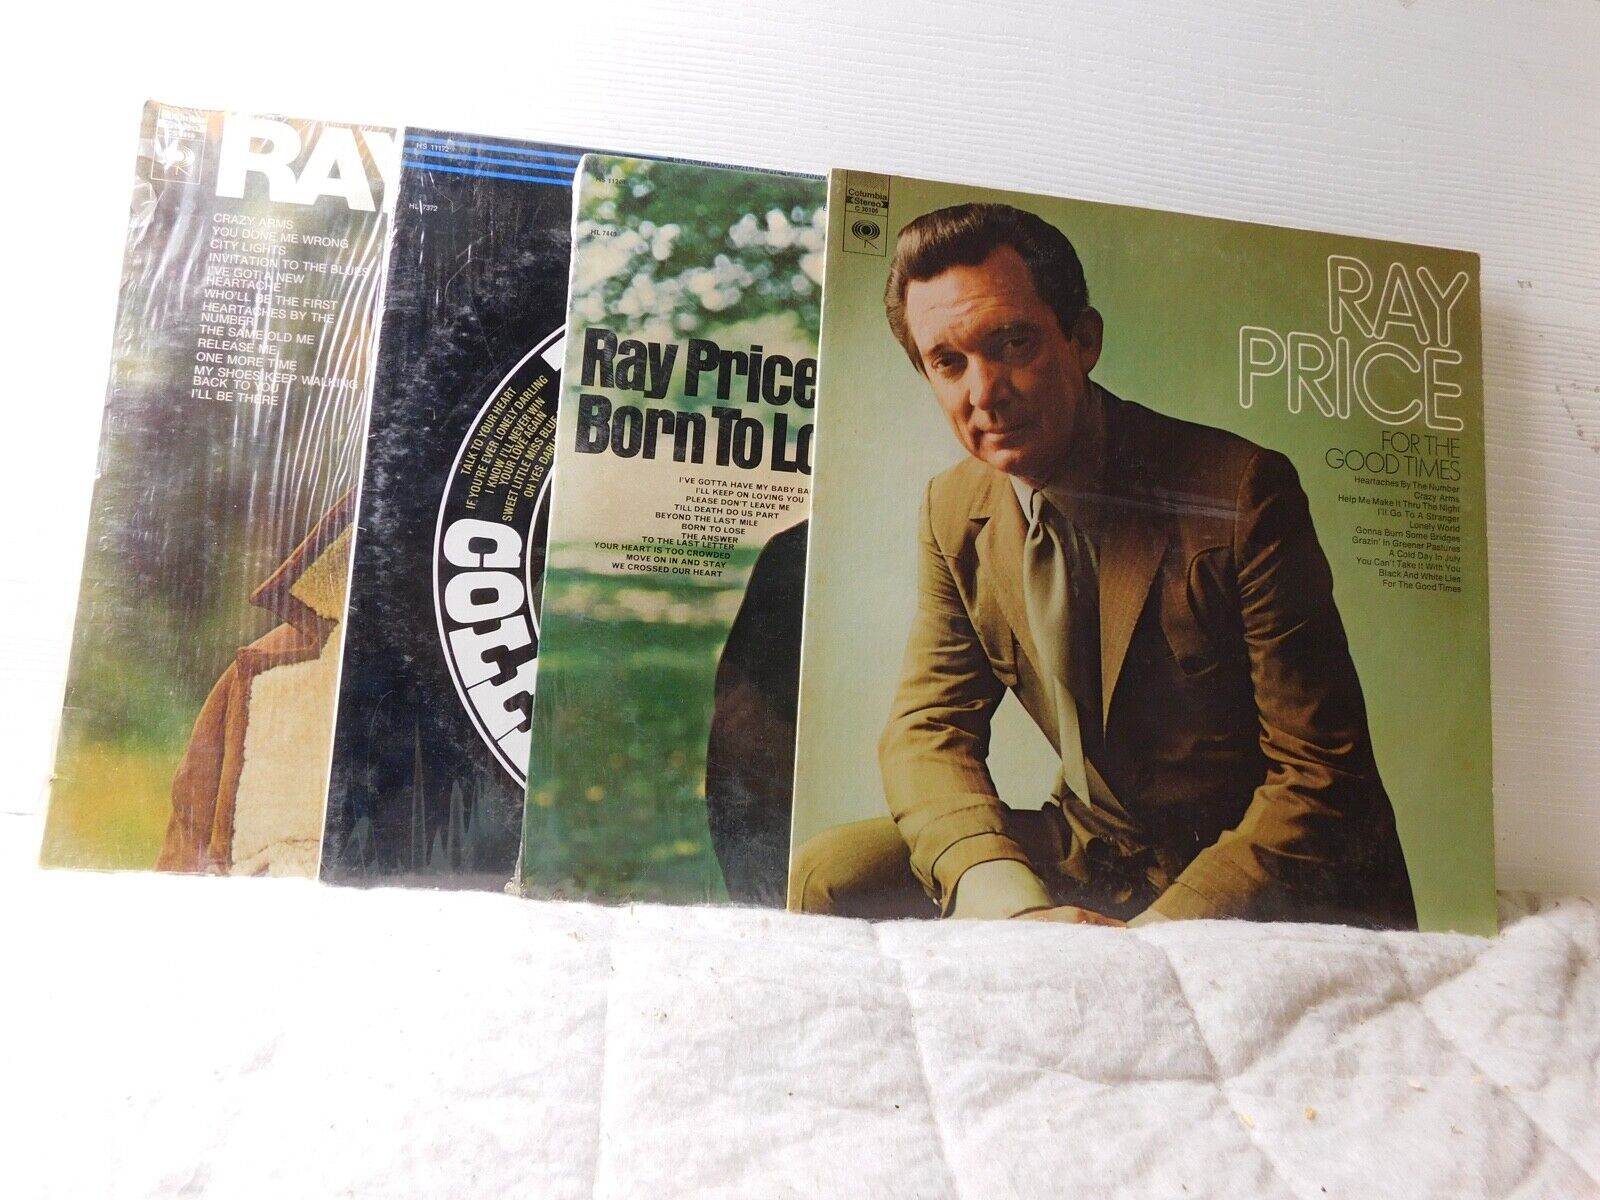 LOT OF 4 RAY PRICE   VINTAGE  COUNTRY MUSIC 33 RPM LPS - 3 ARE IN SHRINK